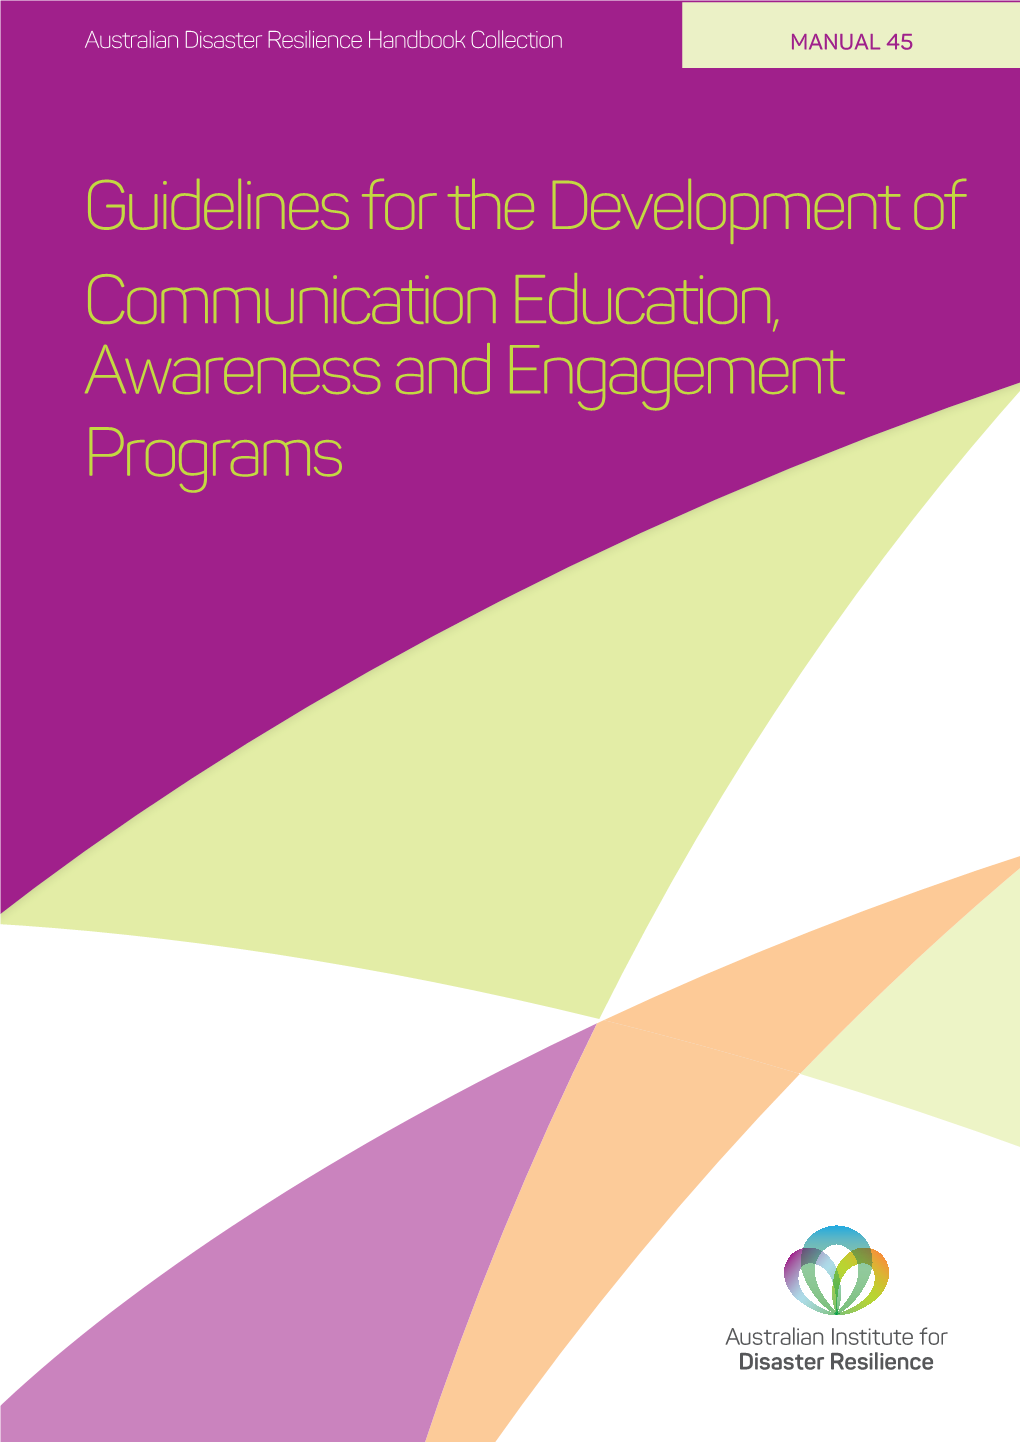 Guidelines for the Development of Communication Education, Awareness and Engagement Programs AUSTRALIAN DISASTER RESILIENCE HANDBOOK COLLECTION